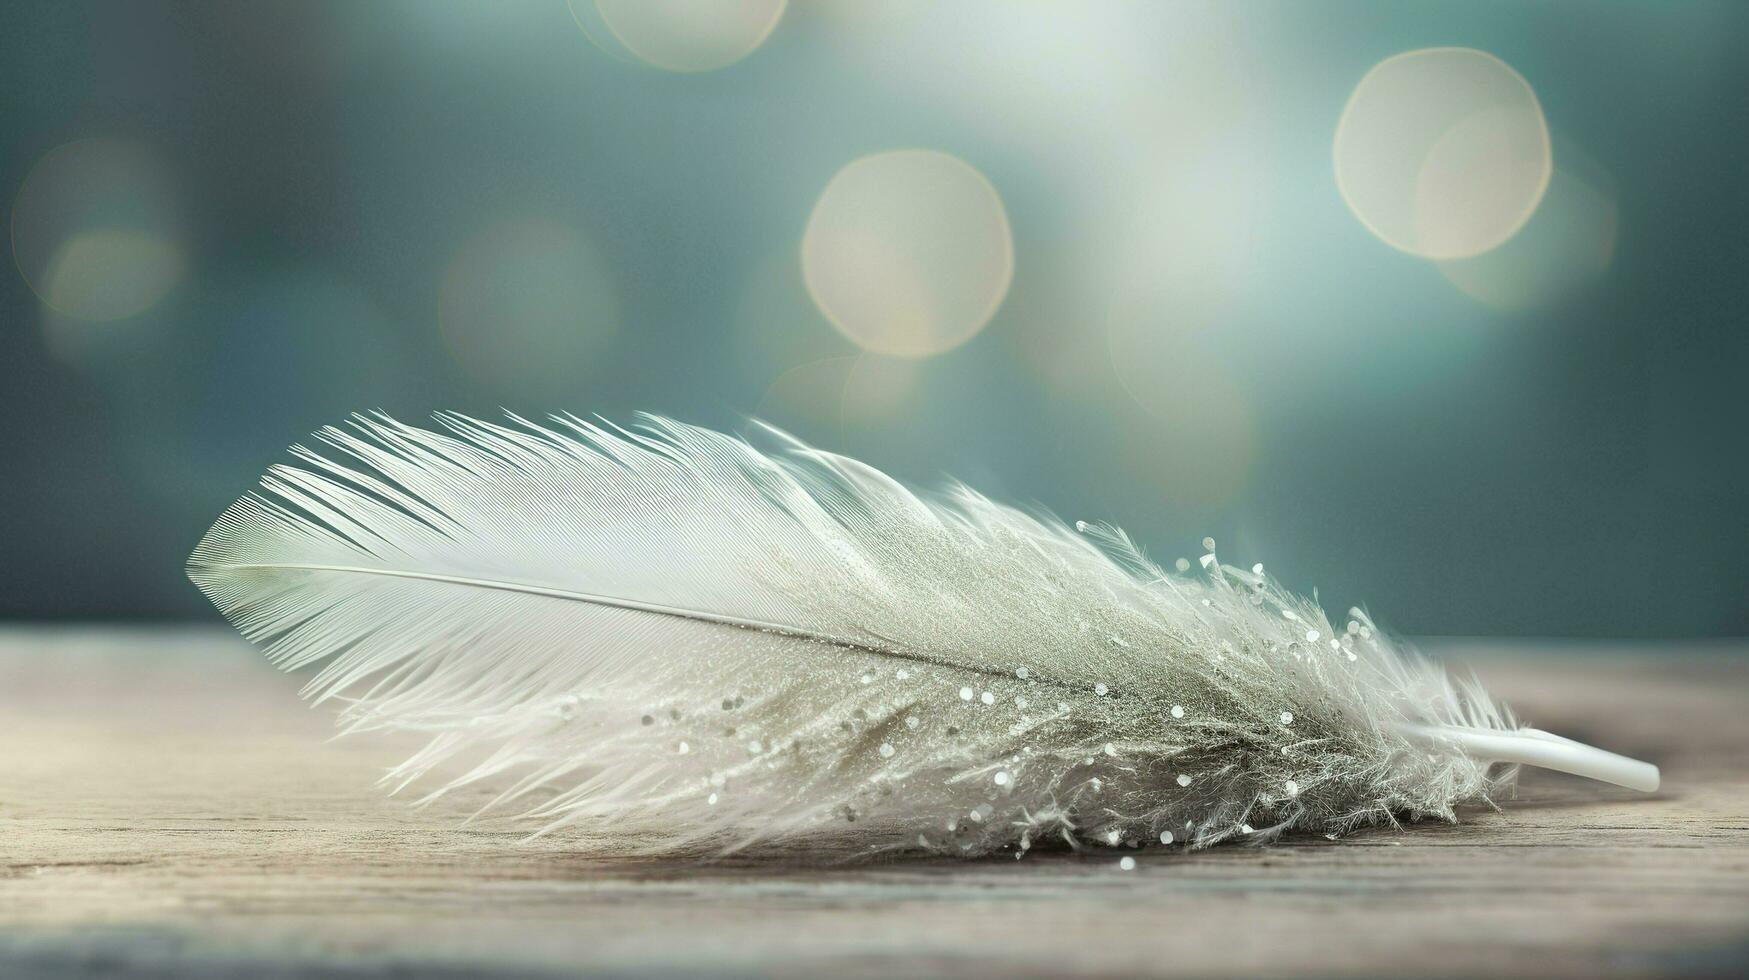 a bright blue background with one white feather, in the style of soft and dreamy pastels, glimmering light effects, nature inspired imagery, fairycore, soft focal points, generate ai photo